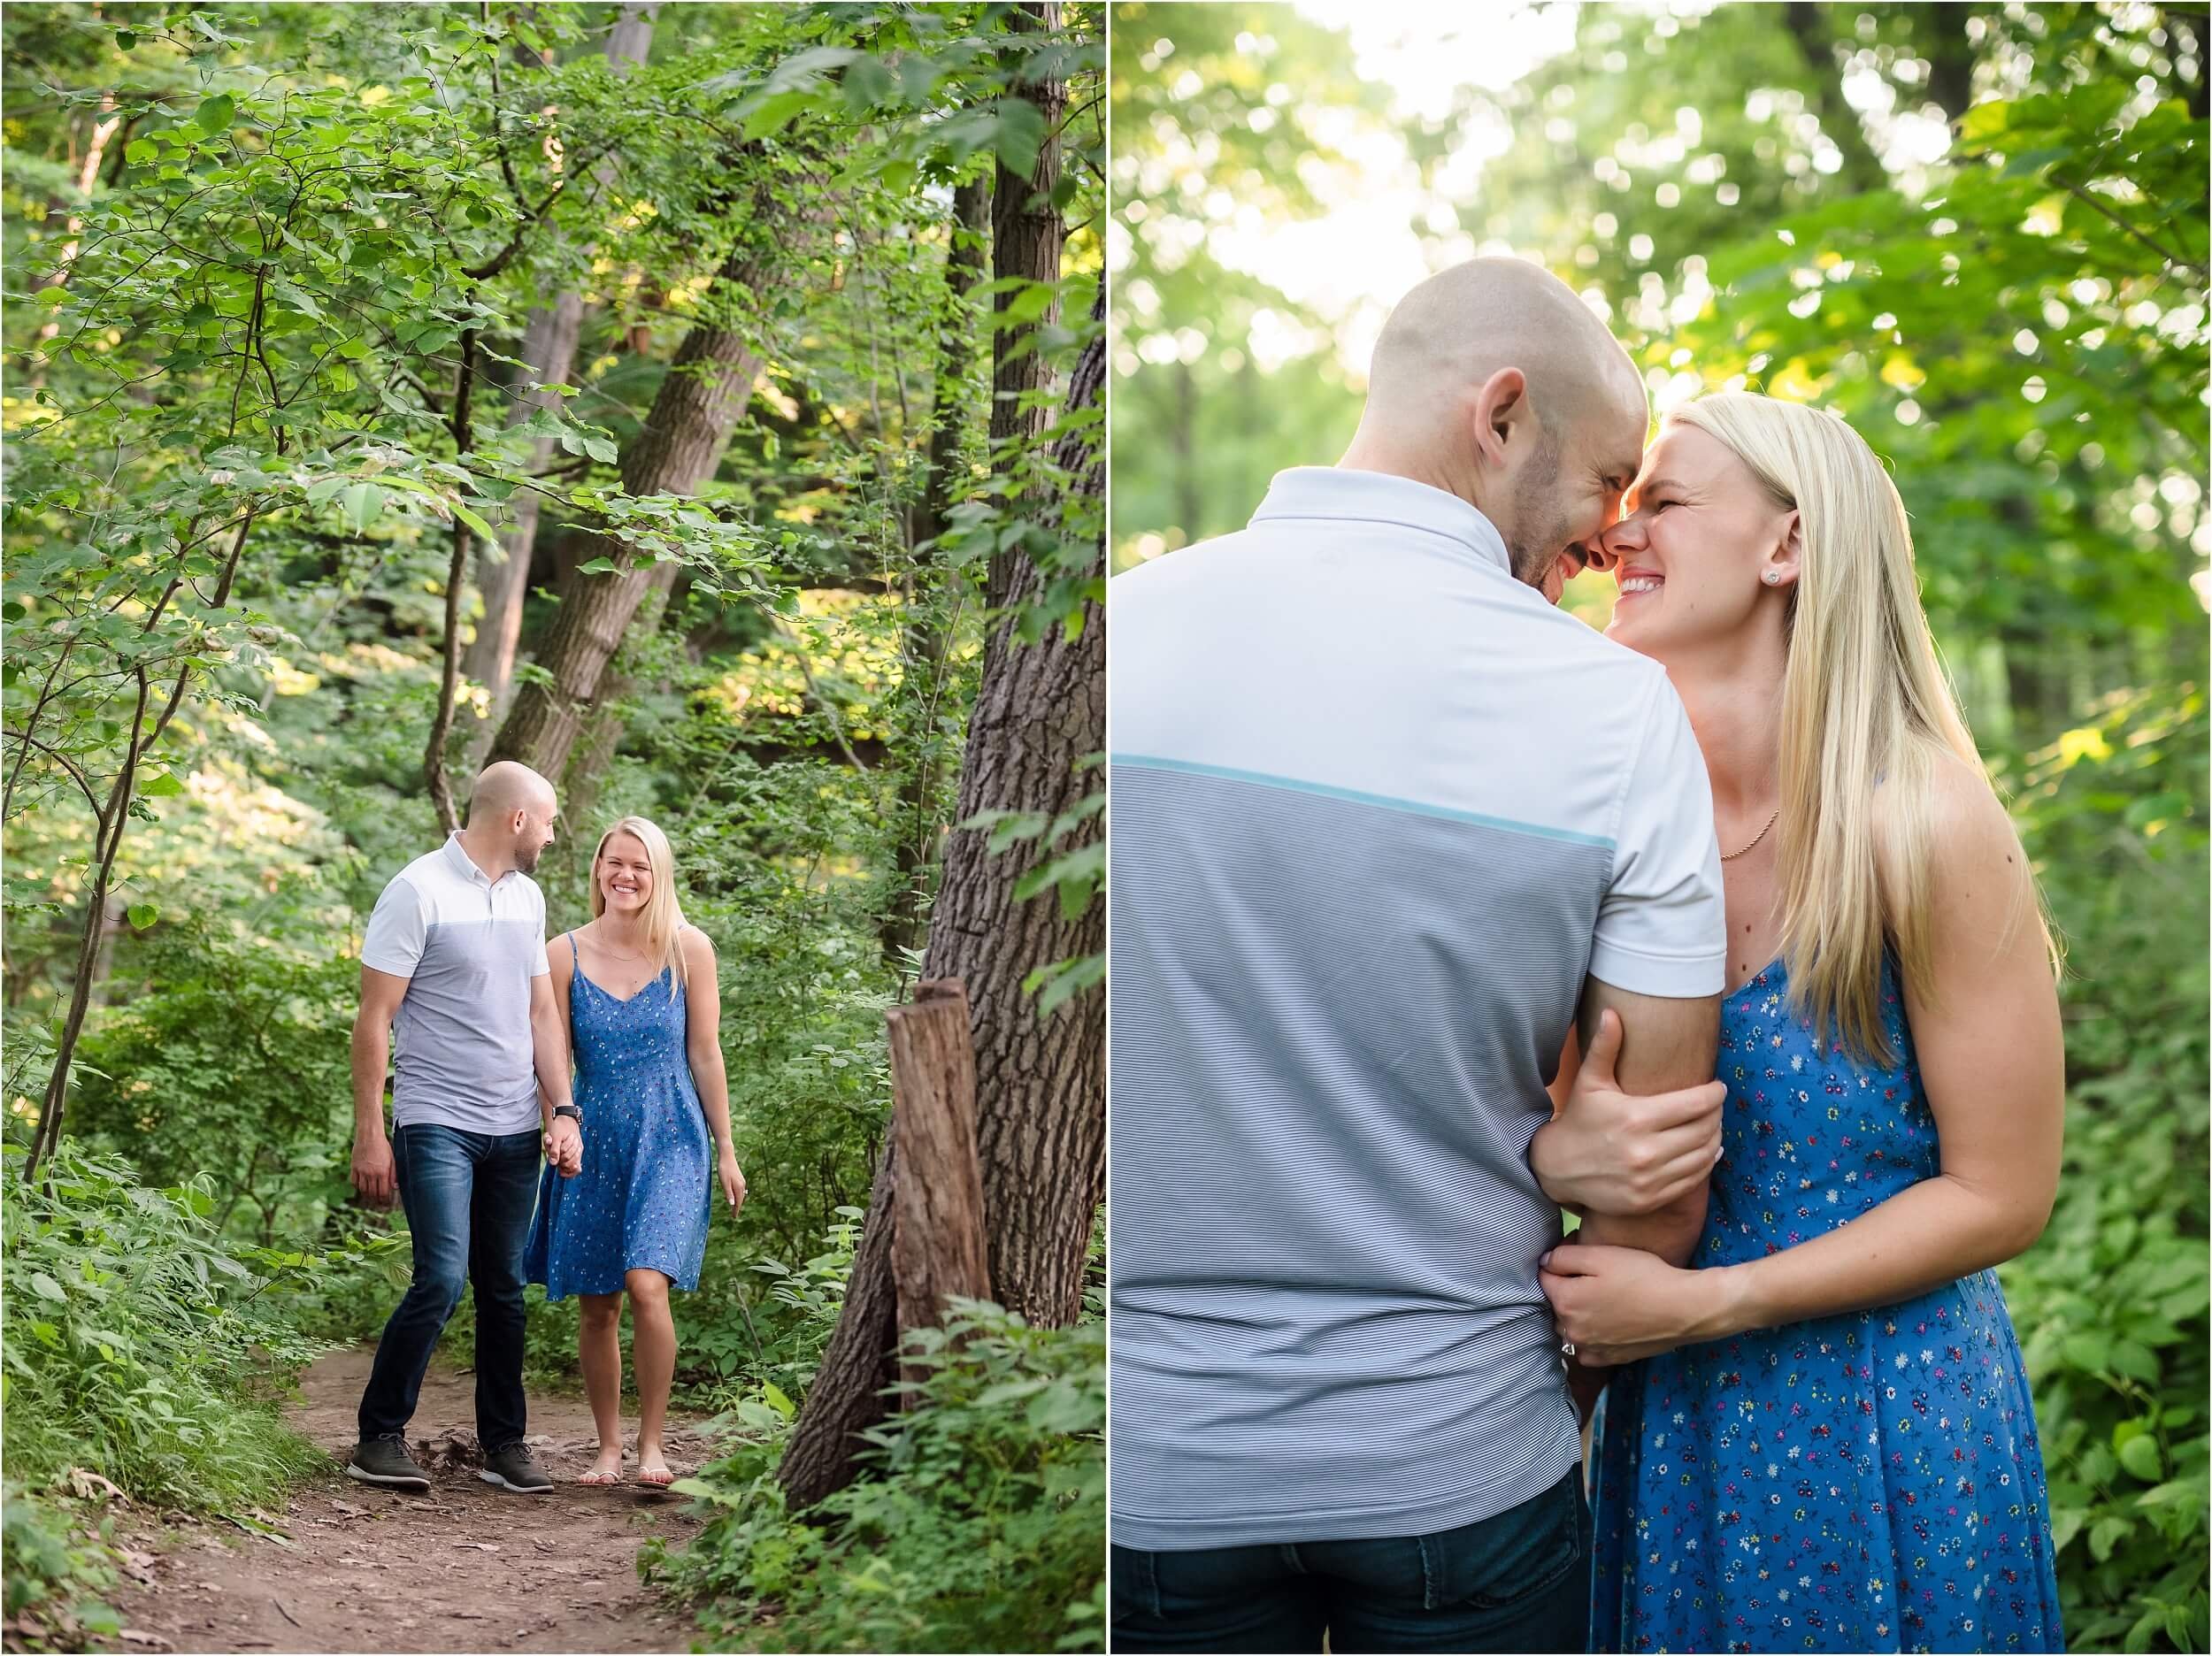  A couple hugs at sunset during their ann arbor engagement session at The Arb.  